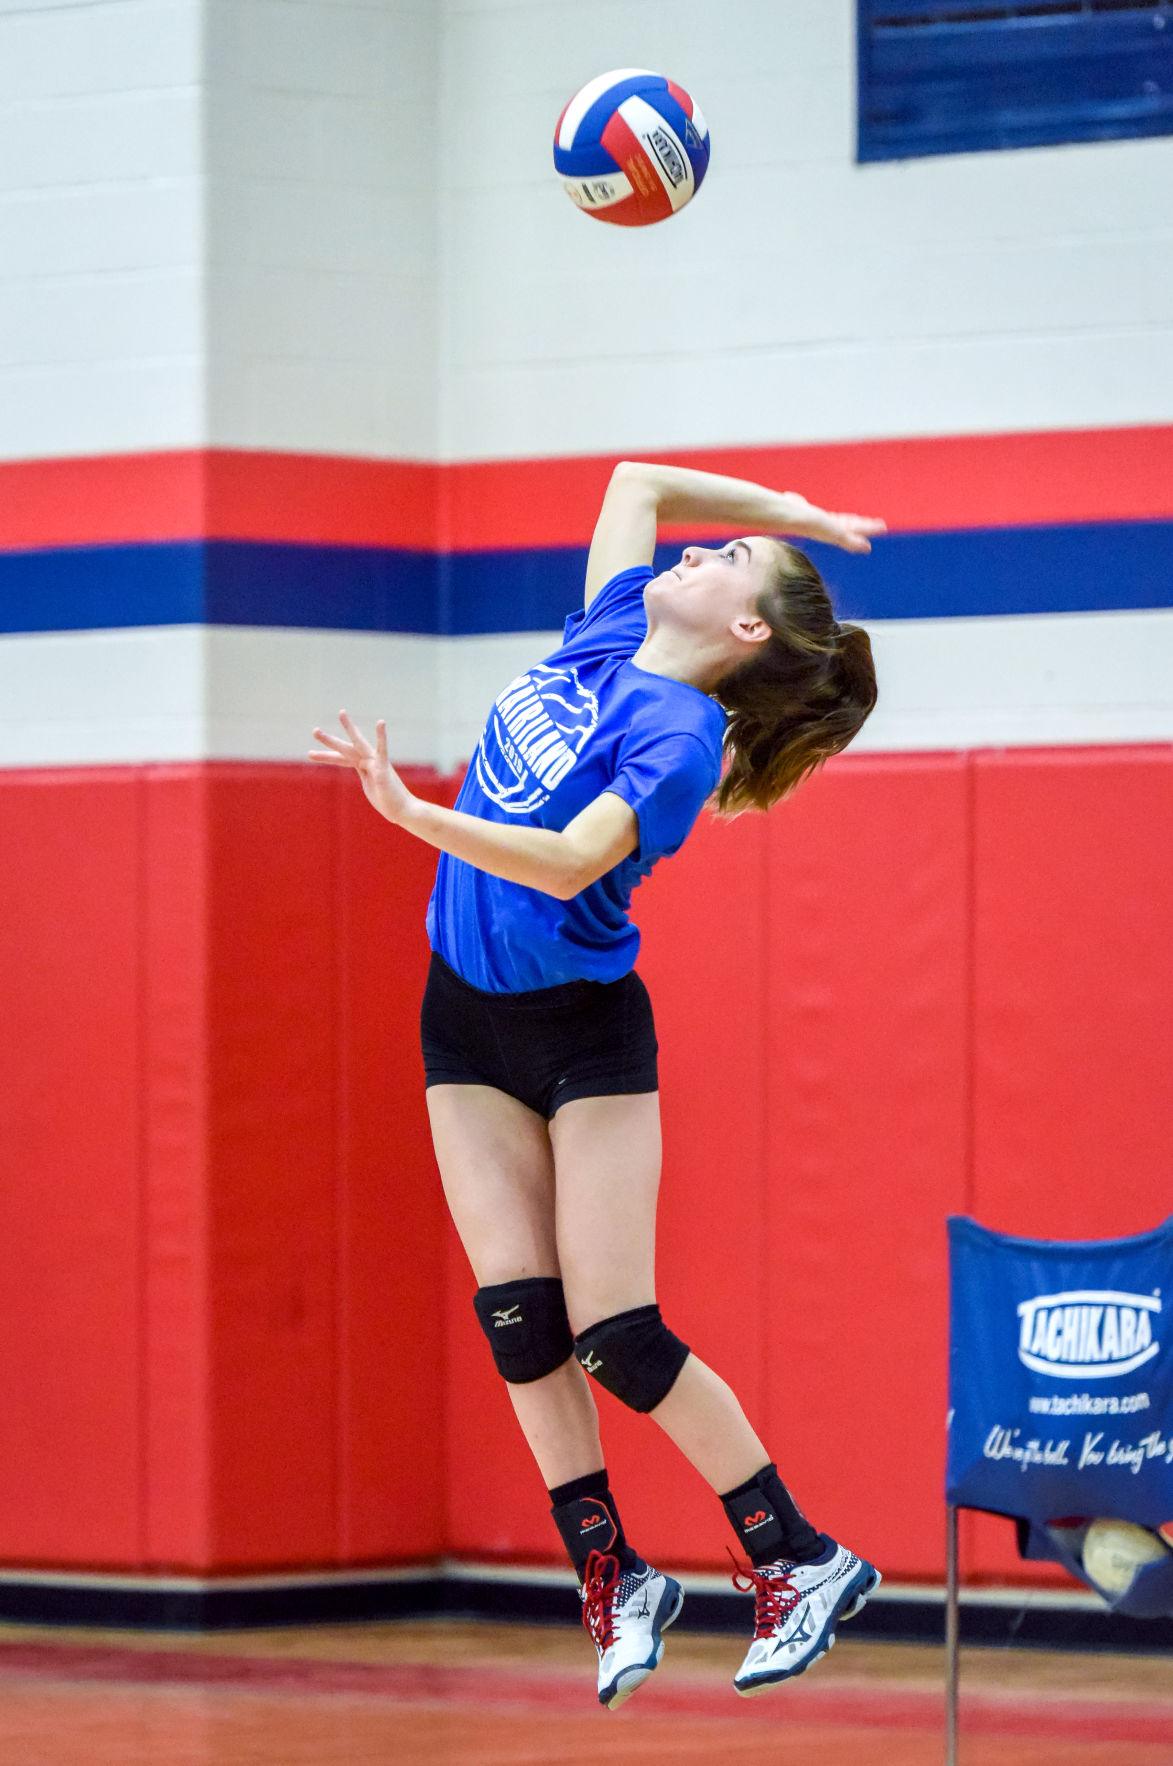 Prairiland High School wraps up volleyball camp | RRV volleyball ...